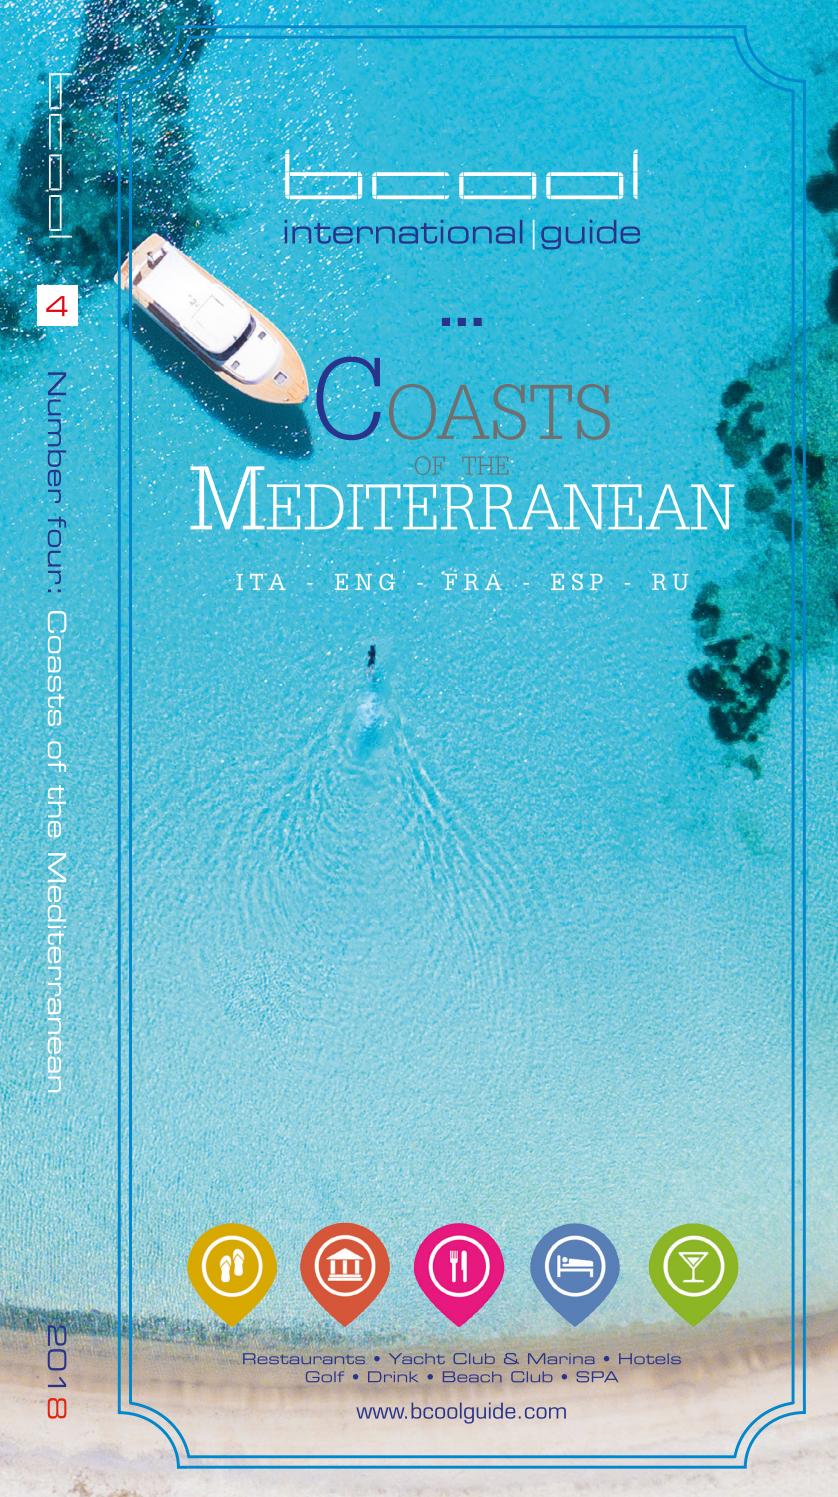 Salon De Jardin Bleu Luxe 2018 Bcool Guide "coasts Of the Mediterrean" by Bcool City